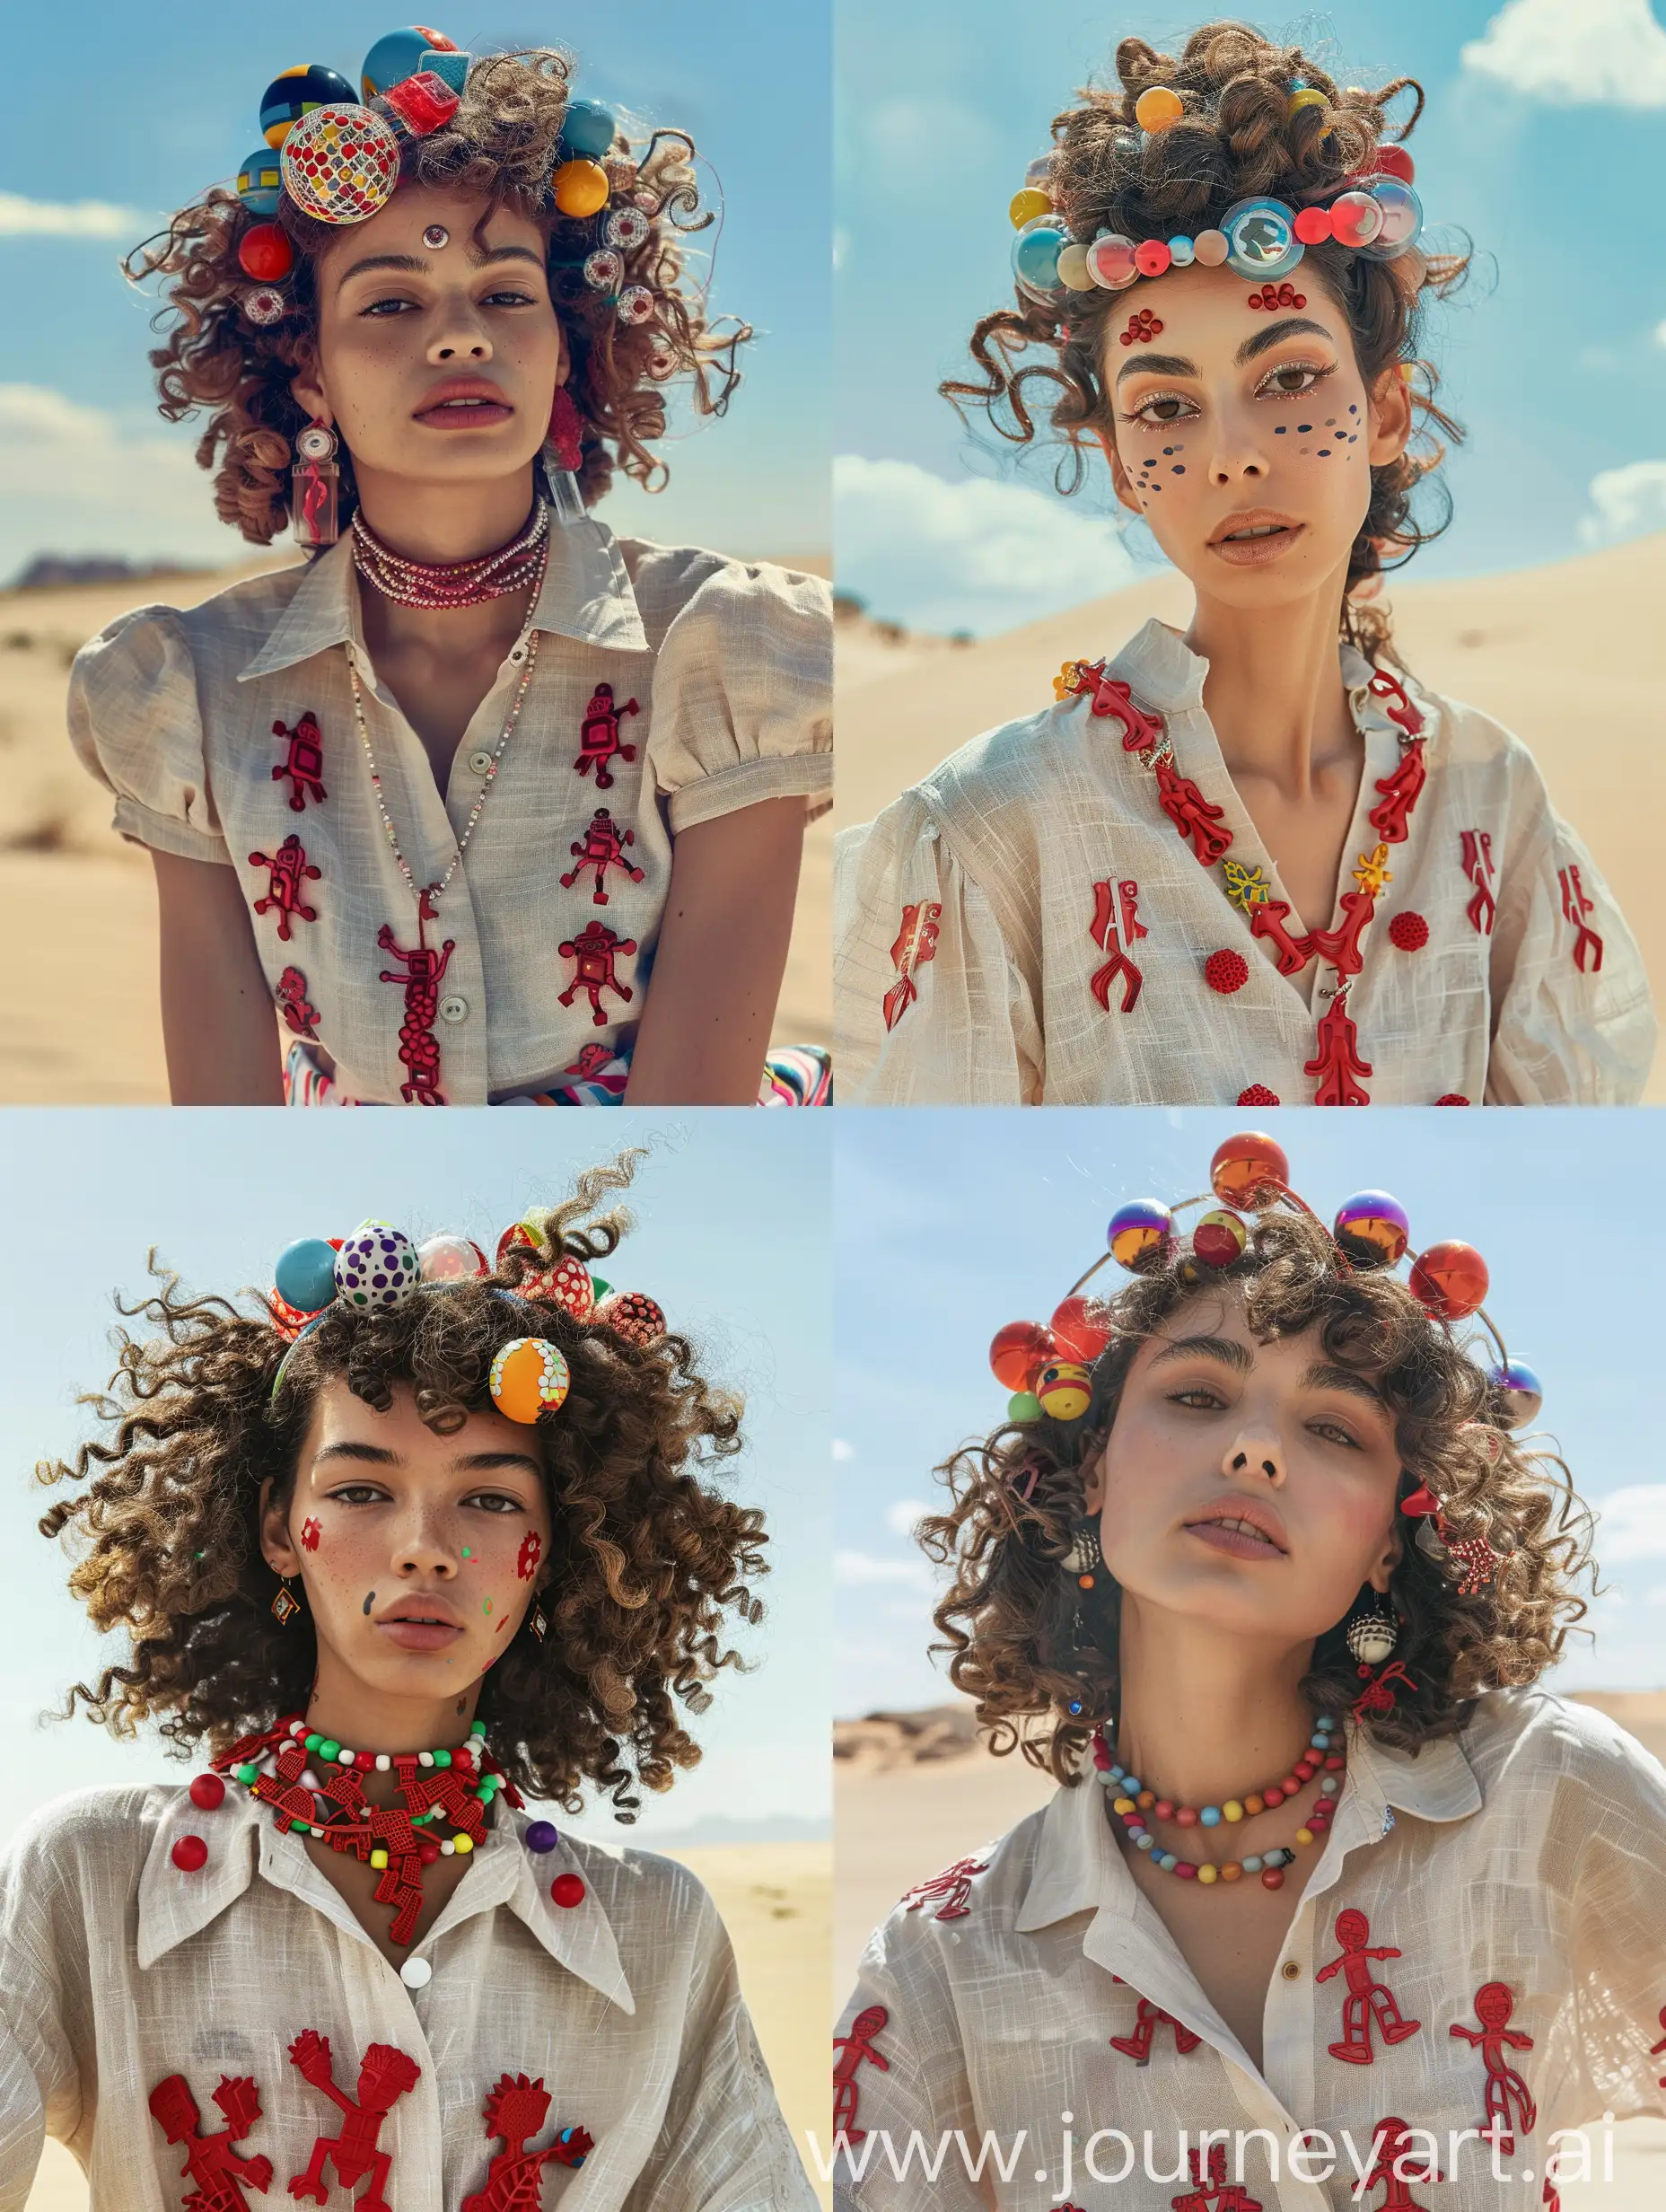 Glamorous-Woman-in-Desert-Landscape-with-Colorful-Accessories